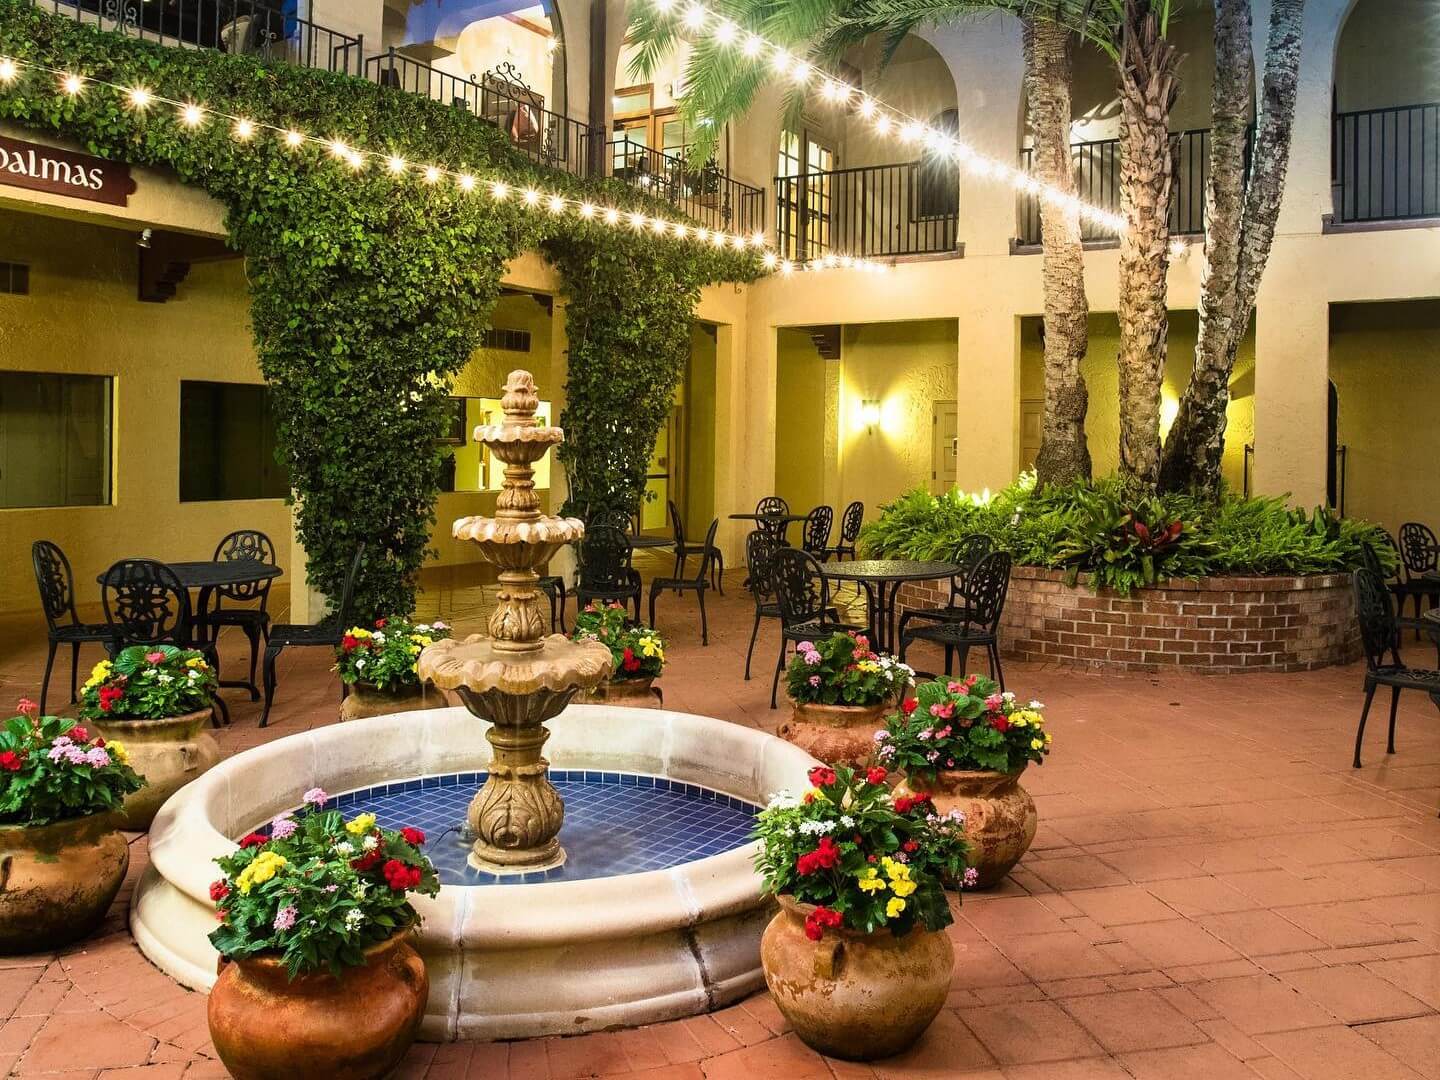 Photo of the water fountains at Mission Inn Resort & Club.